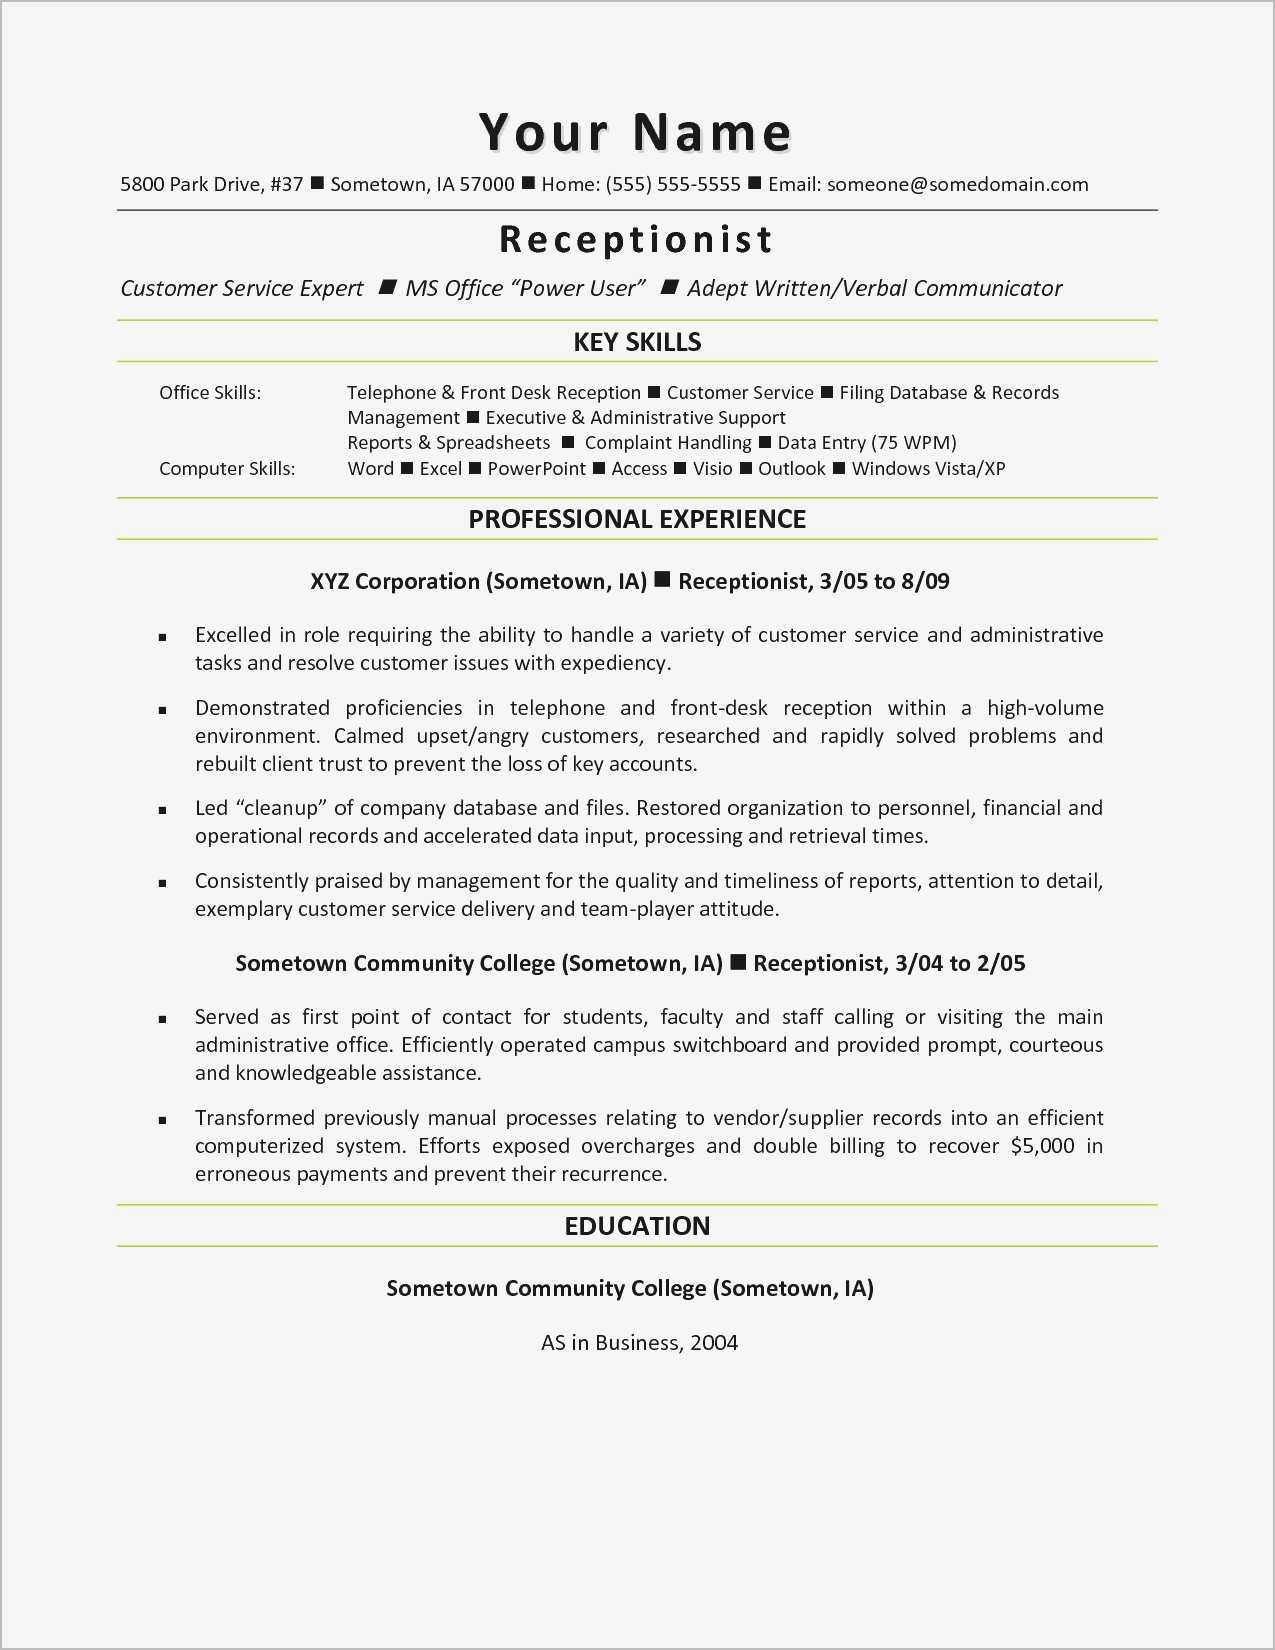 Customer Service Activity Worksheet and Resume Skills for Customer Service Ideas